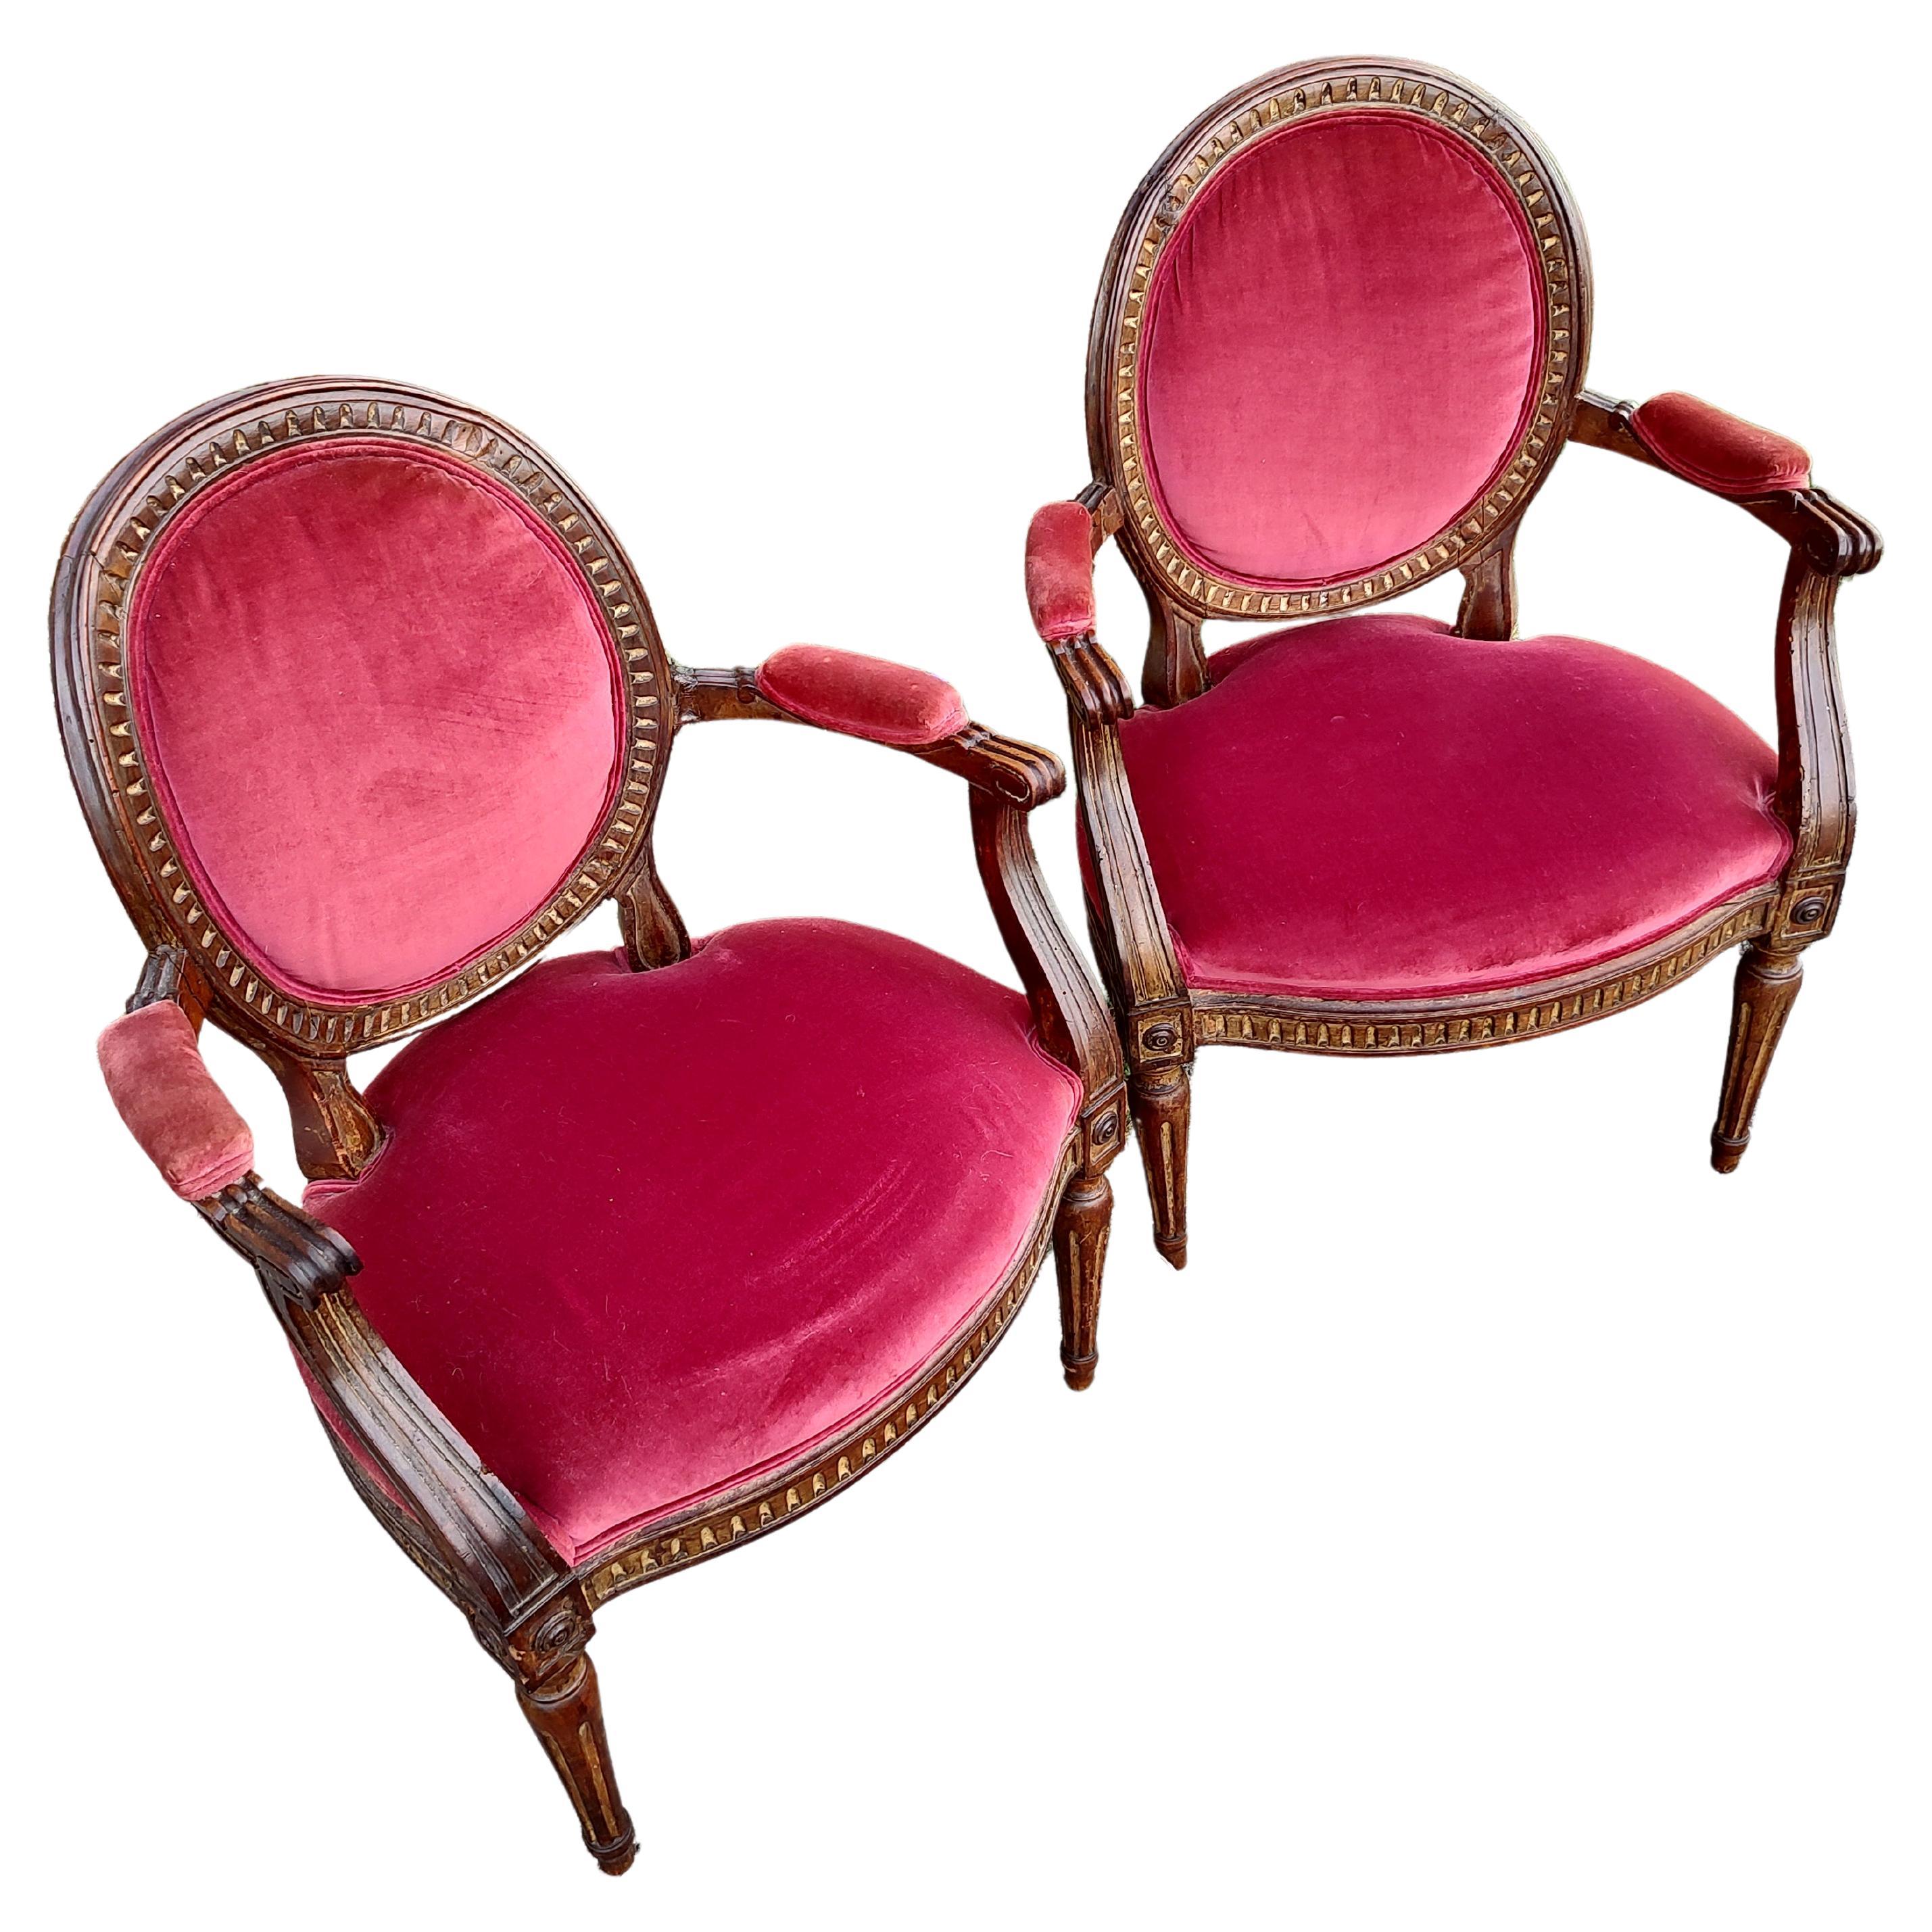 Spectacular pair of 19th Century French Fauteuils Armchairs. Hand carved with hand pegged with mortise & tenon construction. Some gilt remains. In excellent antique condition with minimal wear. Has some minor old repairs. Velvet fabric is in very